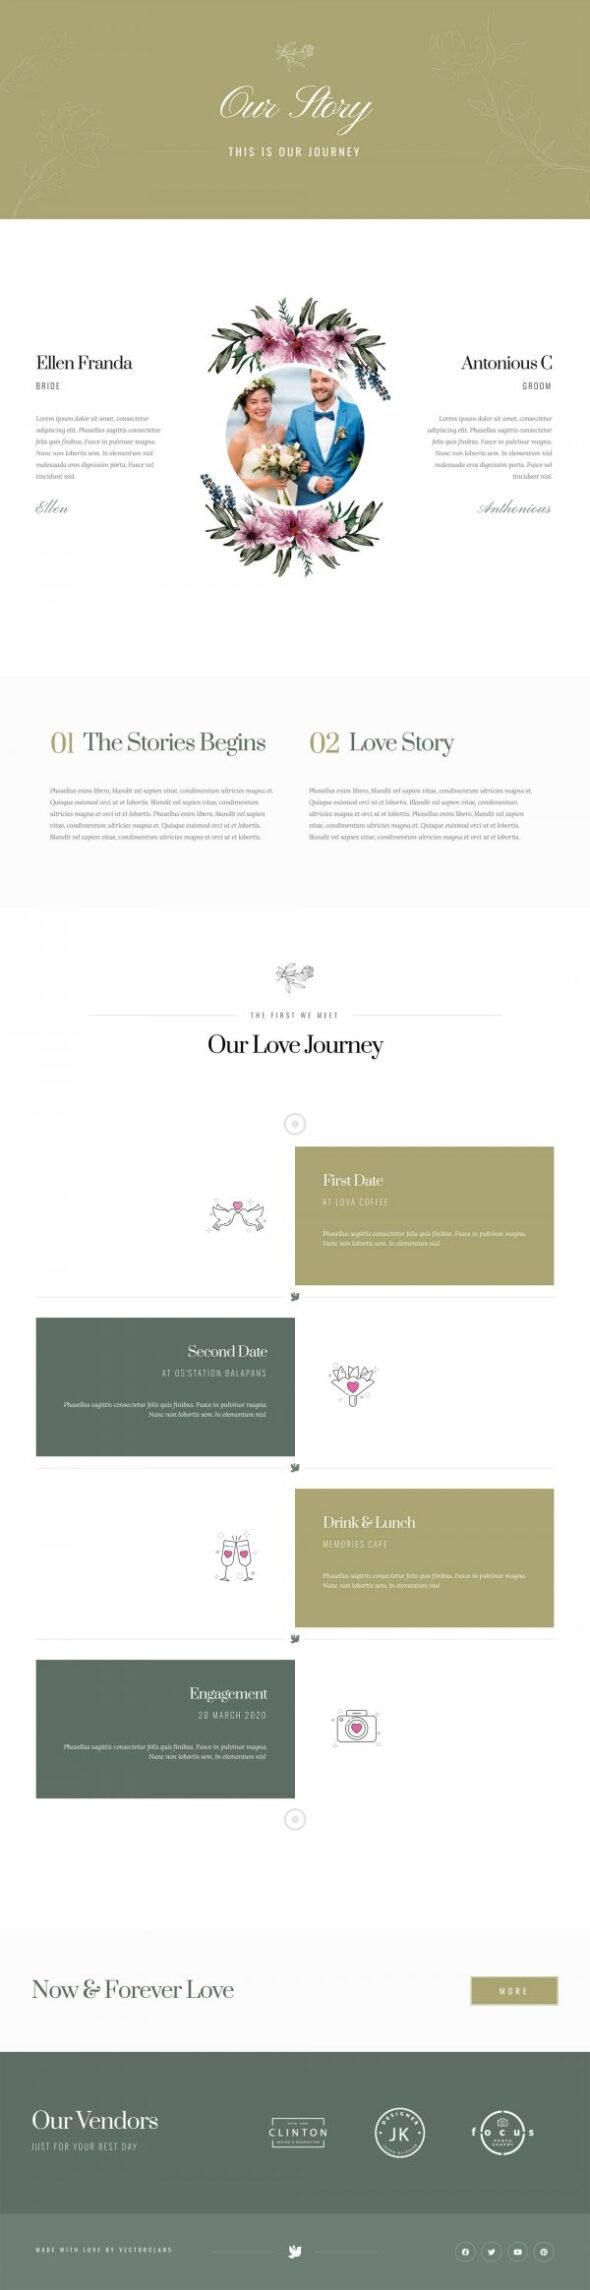 Couples wedding planner template kit